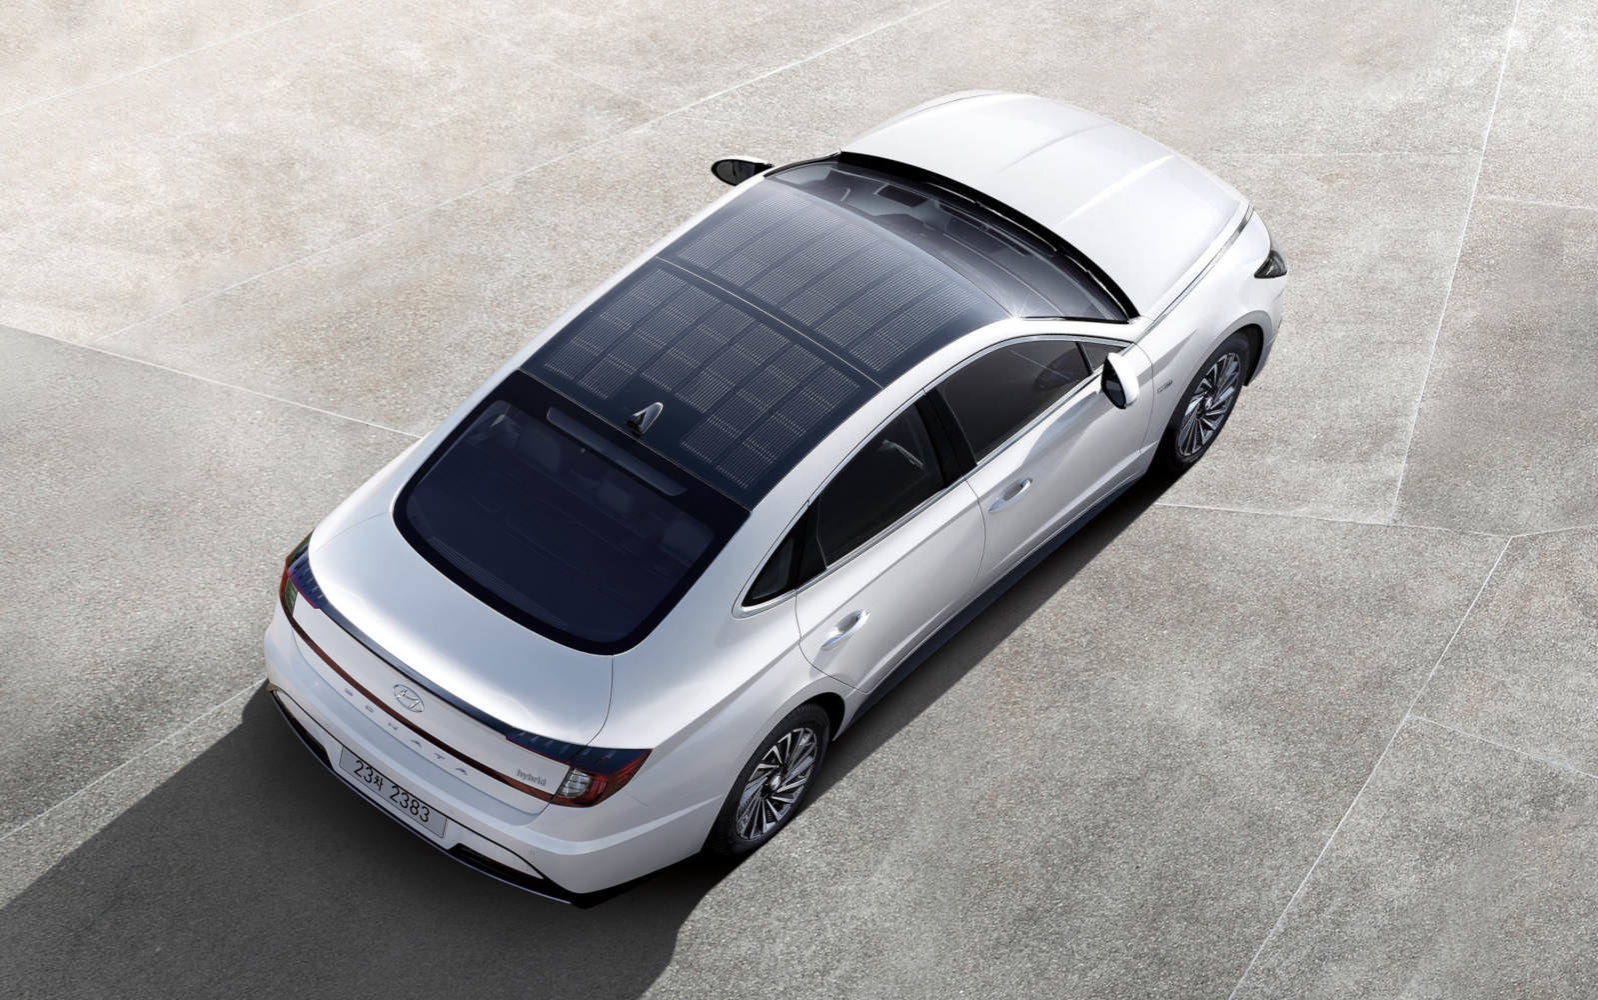 Hyundai’s first car with a solar roof is available in Korea | DeviceDaily.com